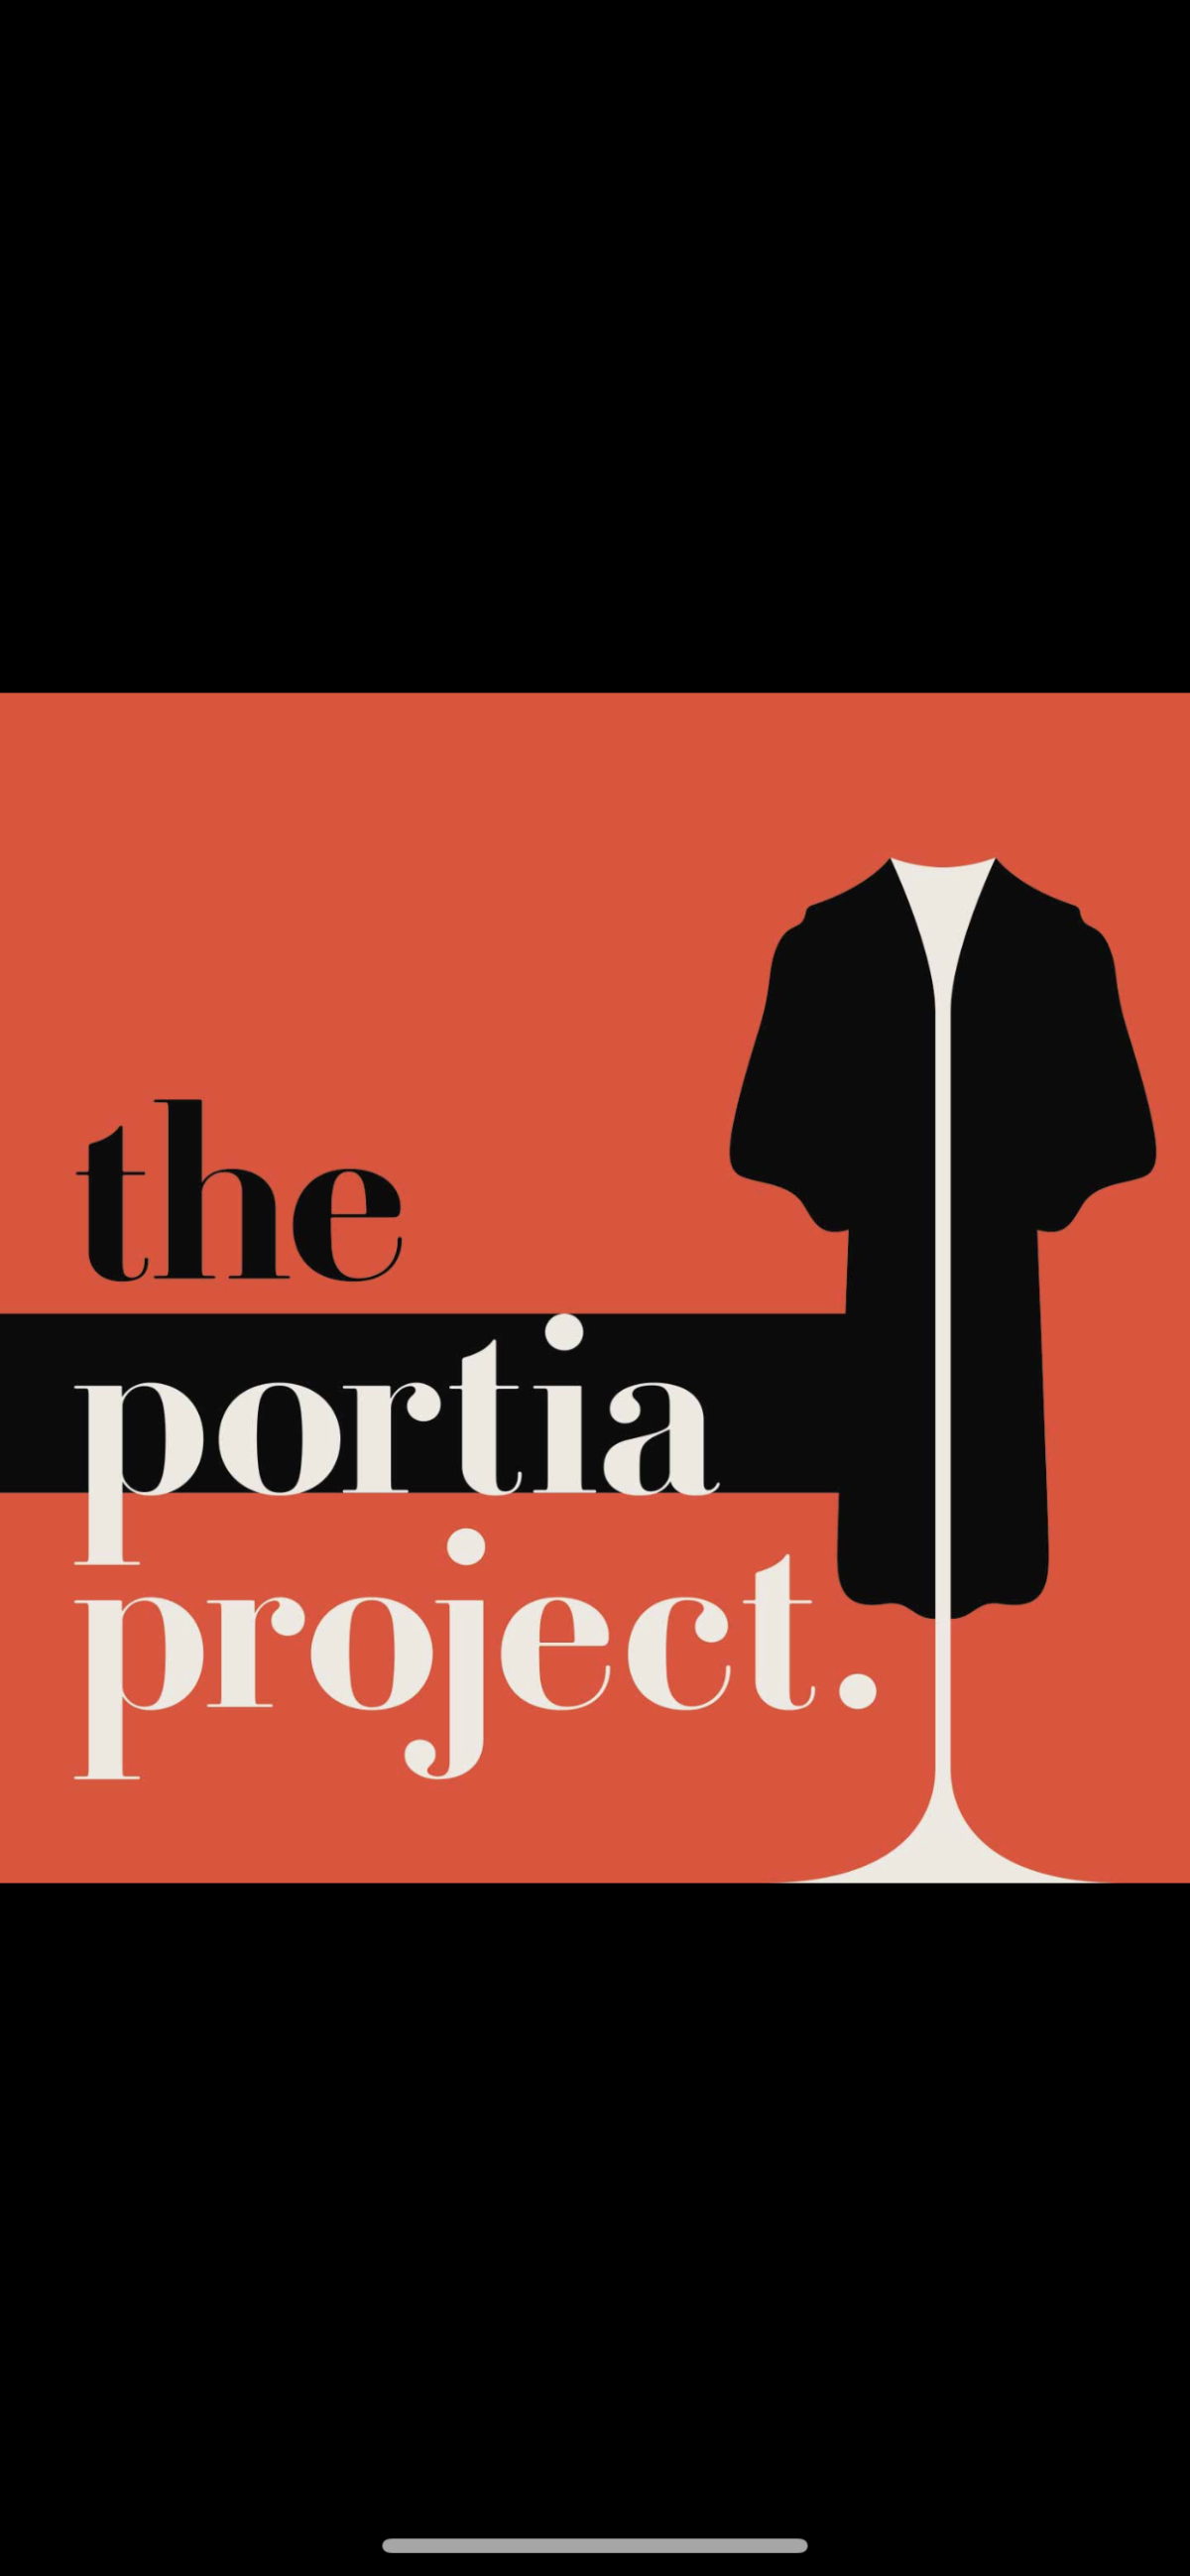 The Portia Project is a new podcast that launched this week.